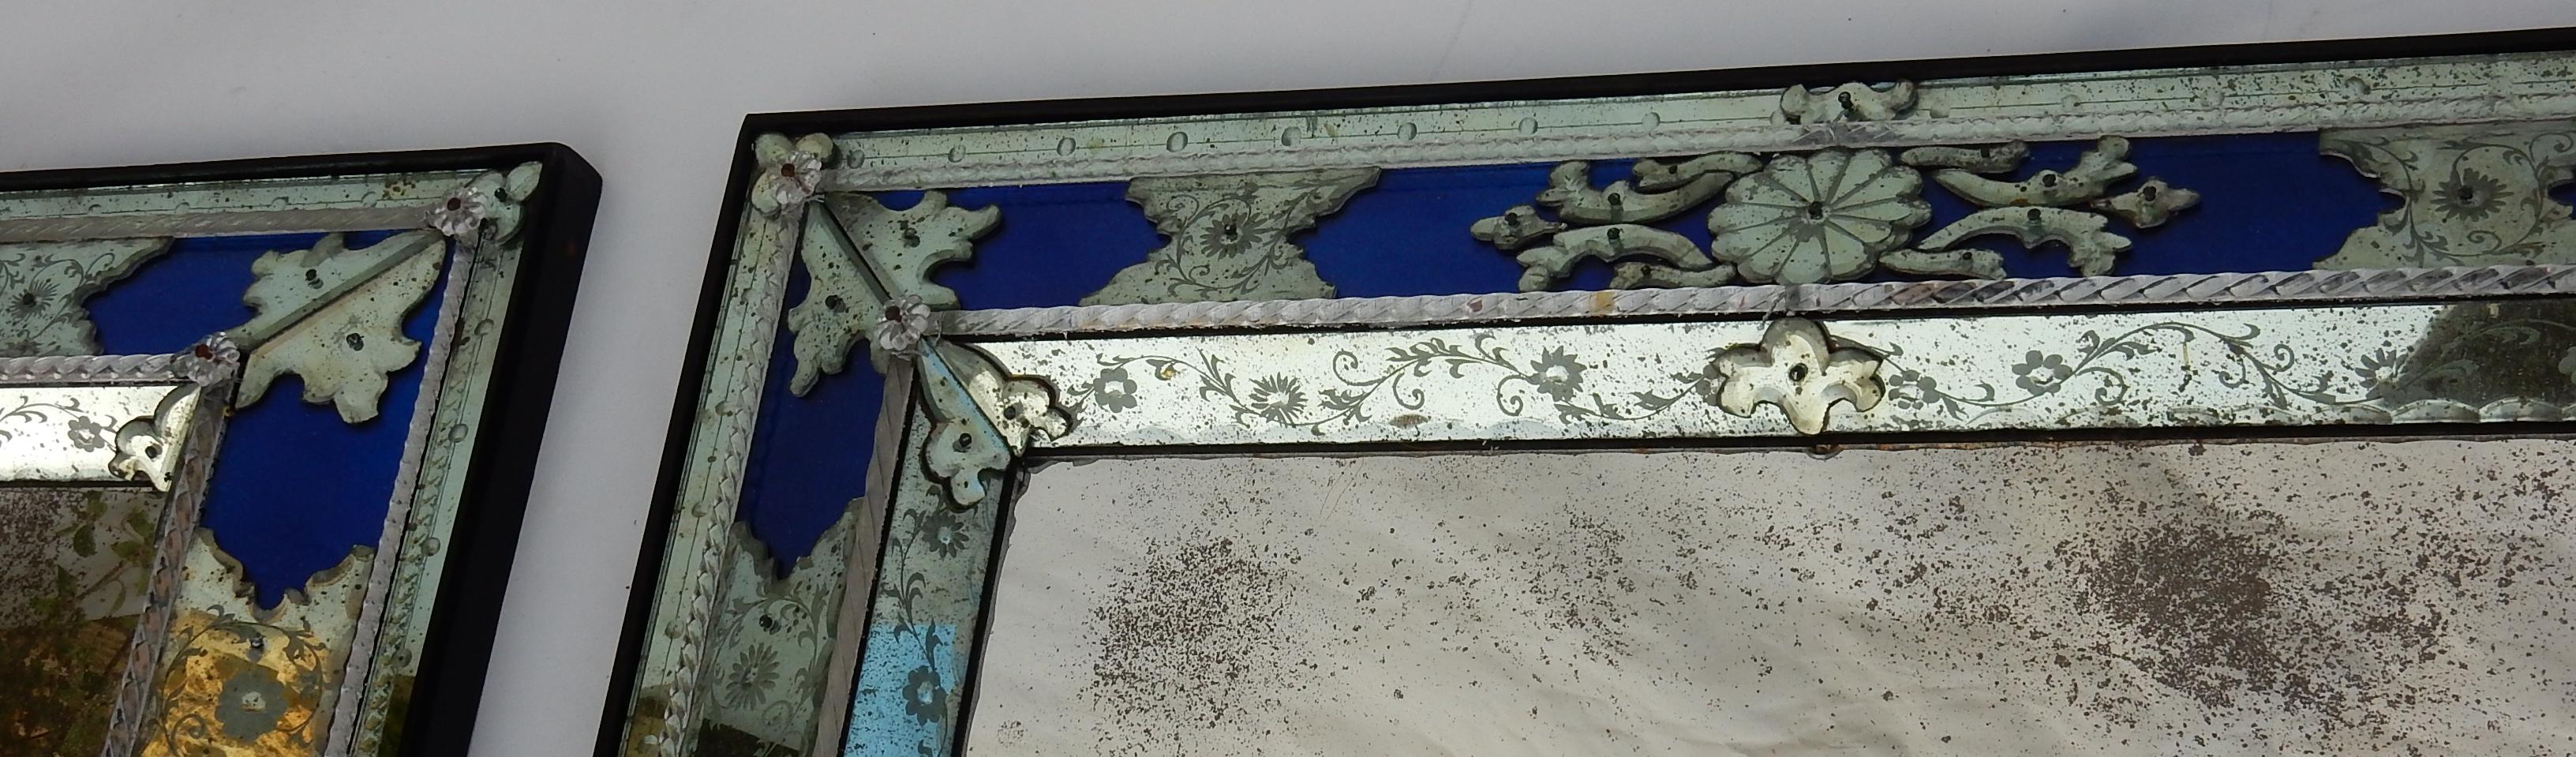 1970-1980 Pair of Louis XIV Style Venice Mirrors with Blue Glass Ornaments For Sale 5